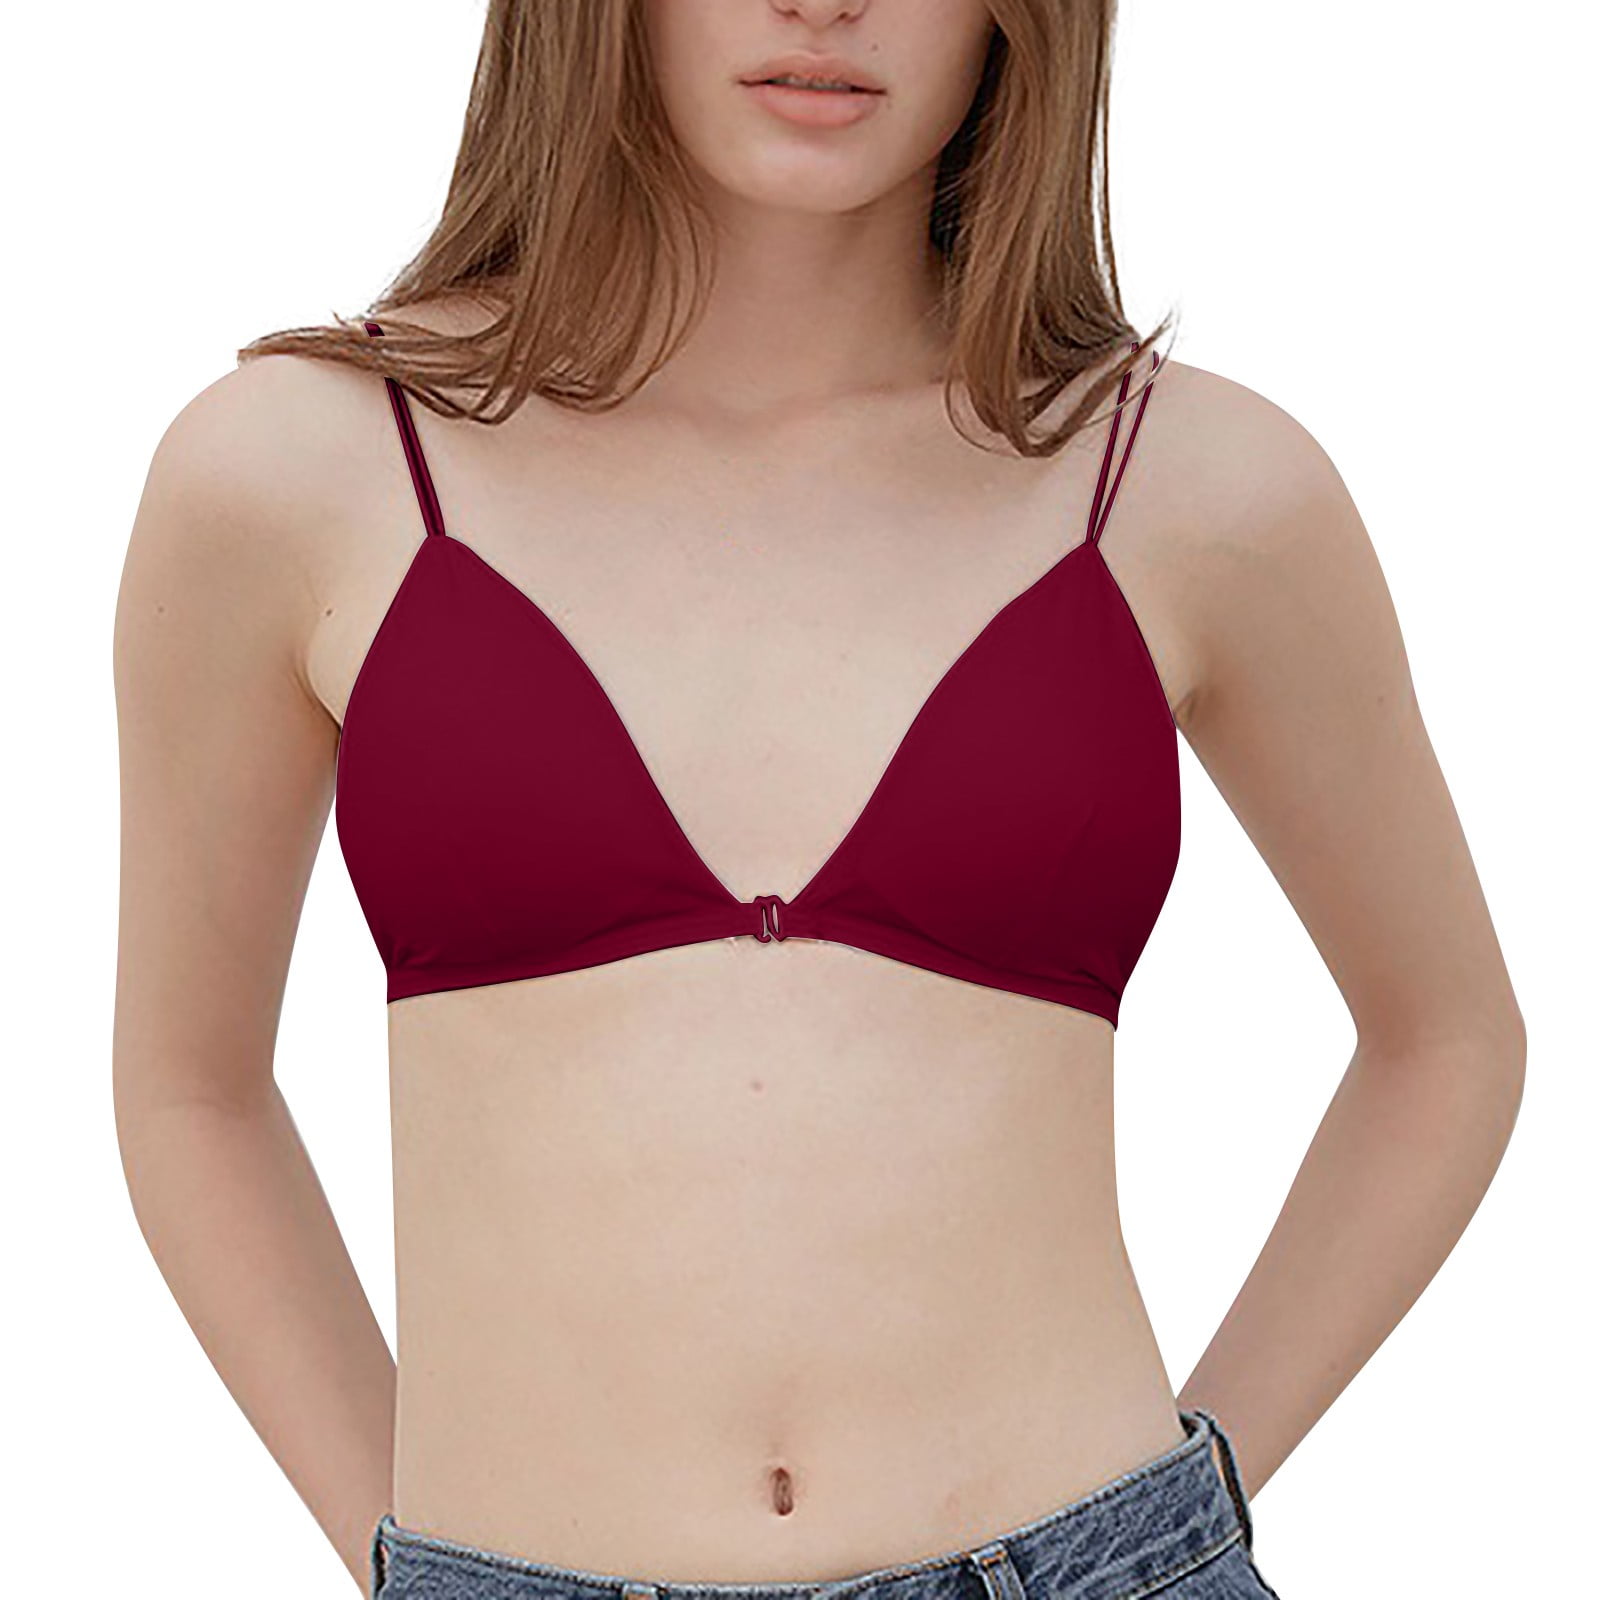 Plus Size Bras for Women Bralette For Girls Teens Low Support